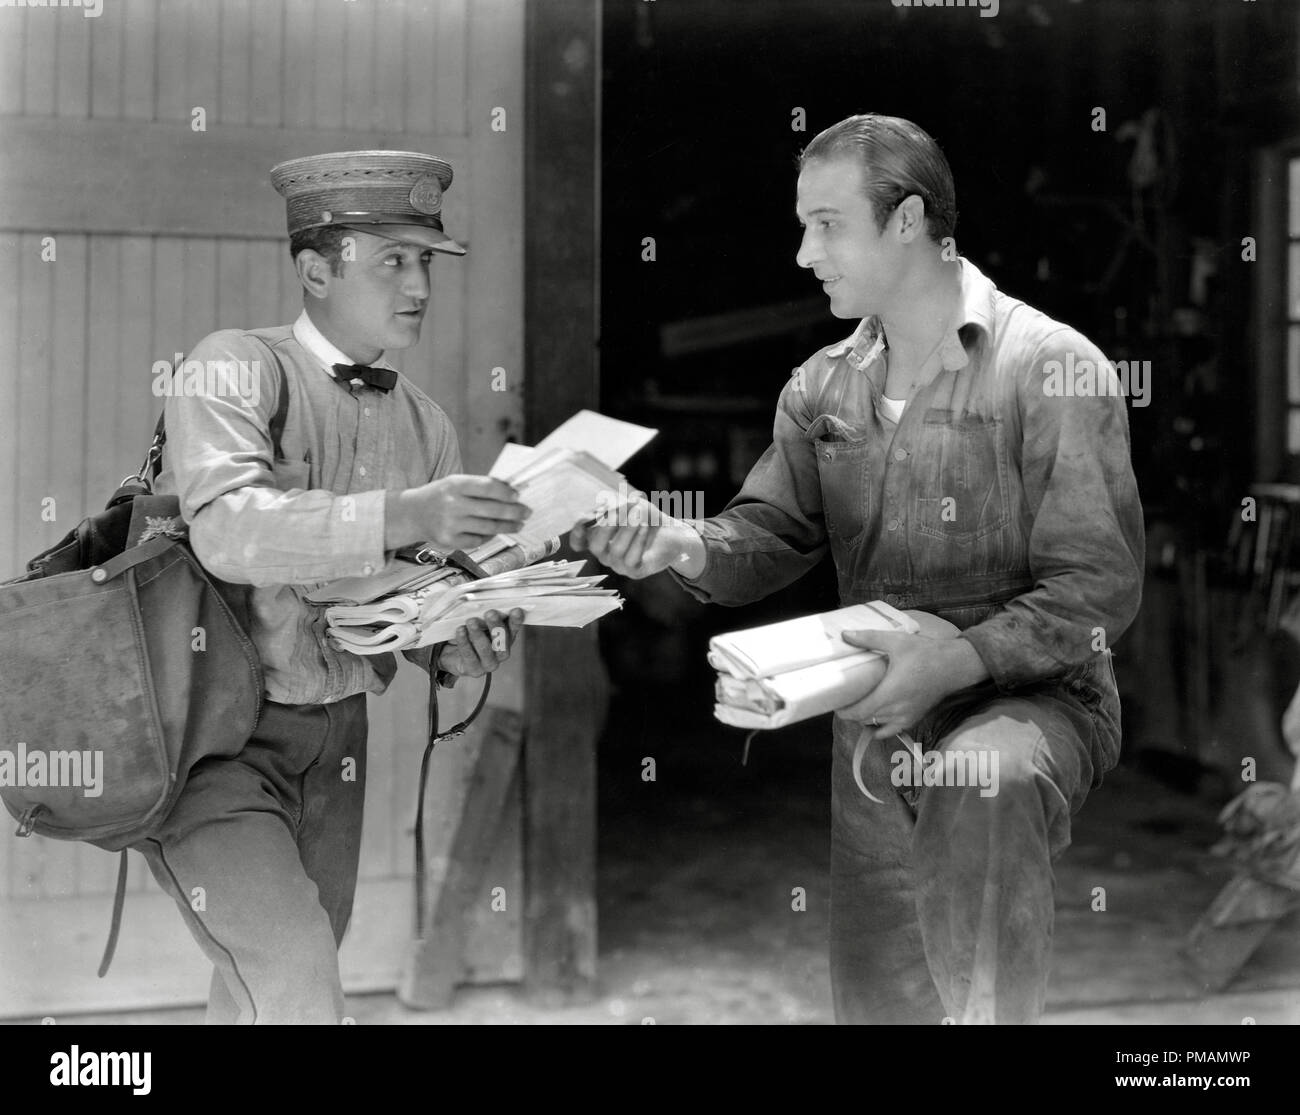 Rudolph Valentino getting his fan mail circa 1925 File Reference # 070THA For Editorial Use Only - All Rights Reserved Stock Photo - Alamy